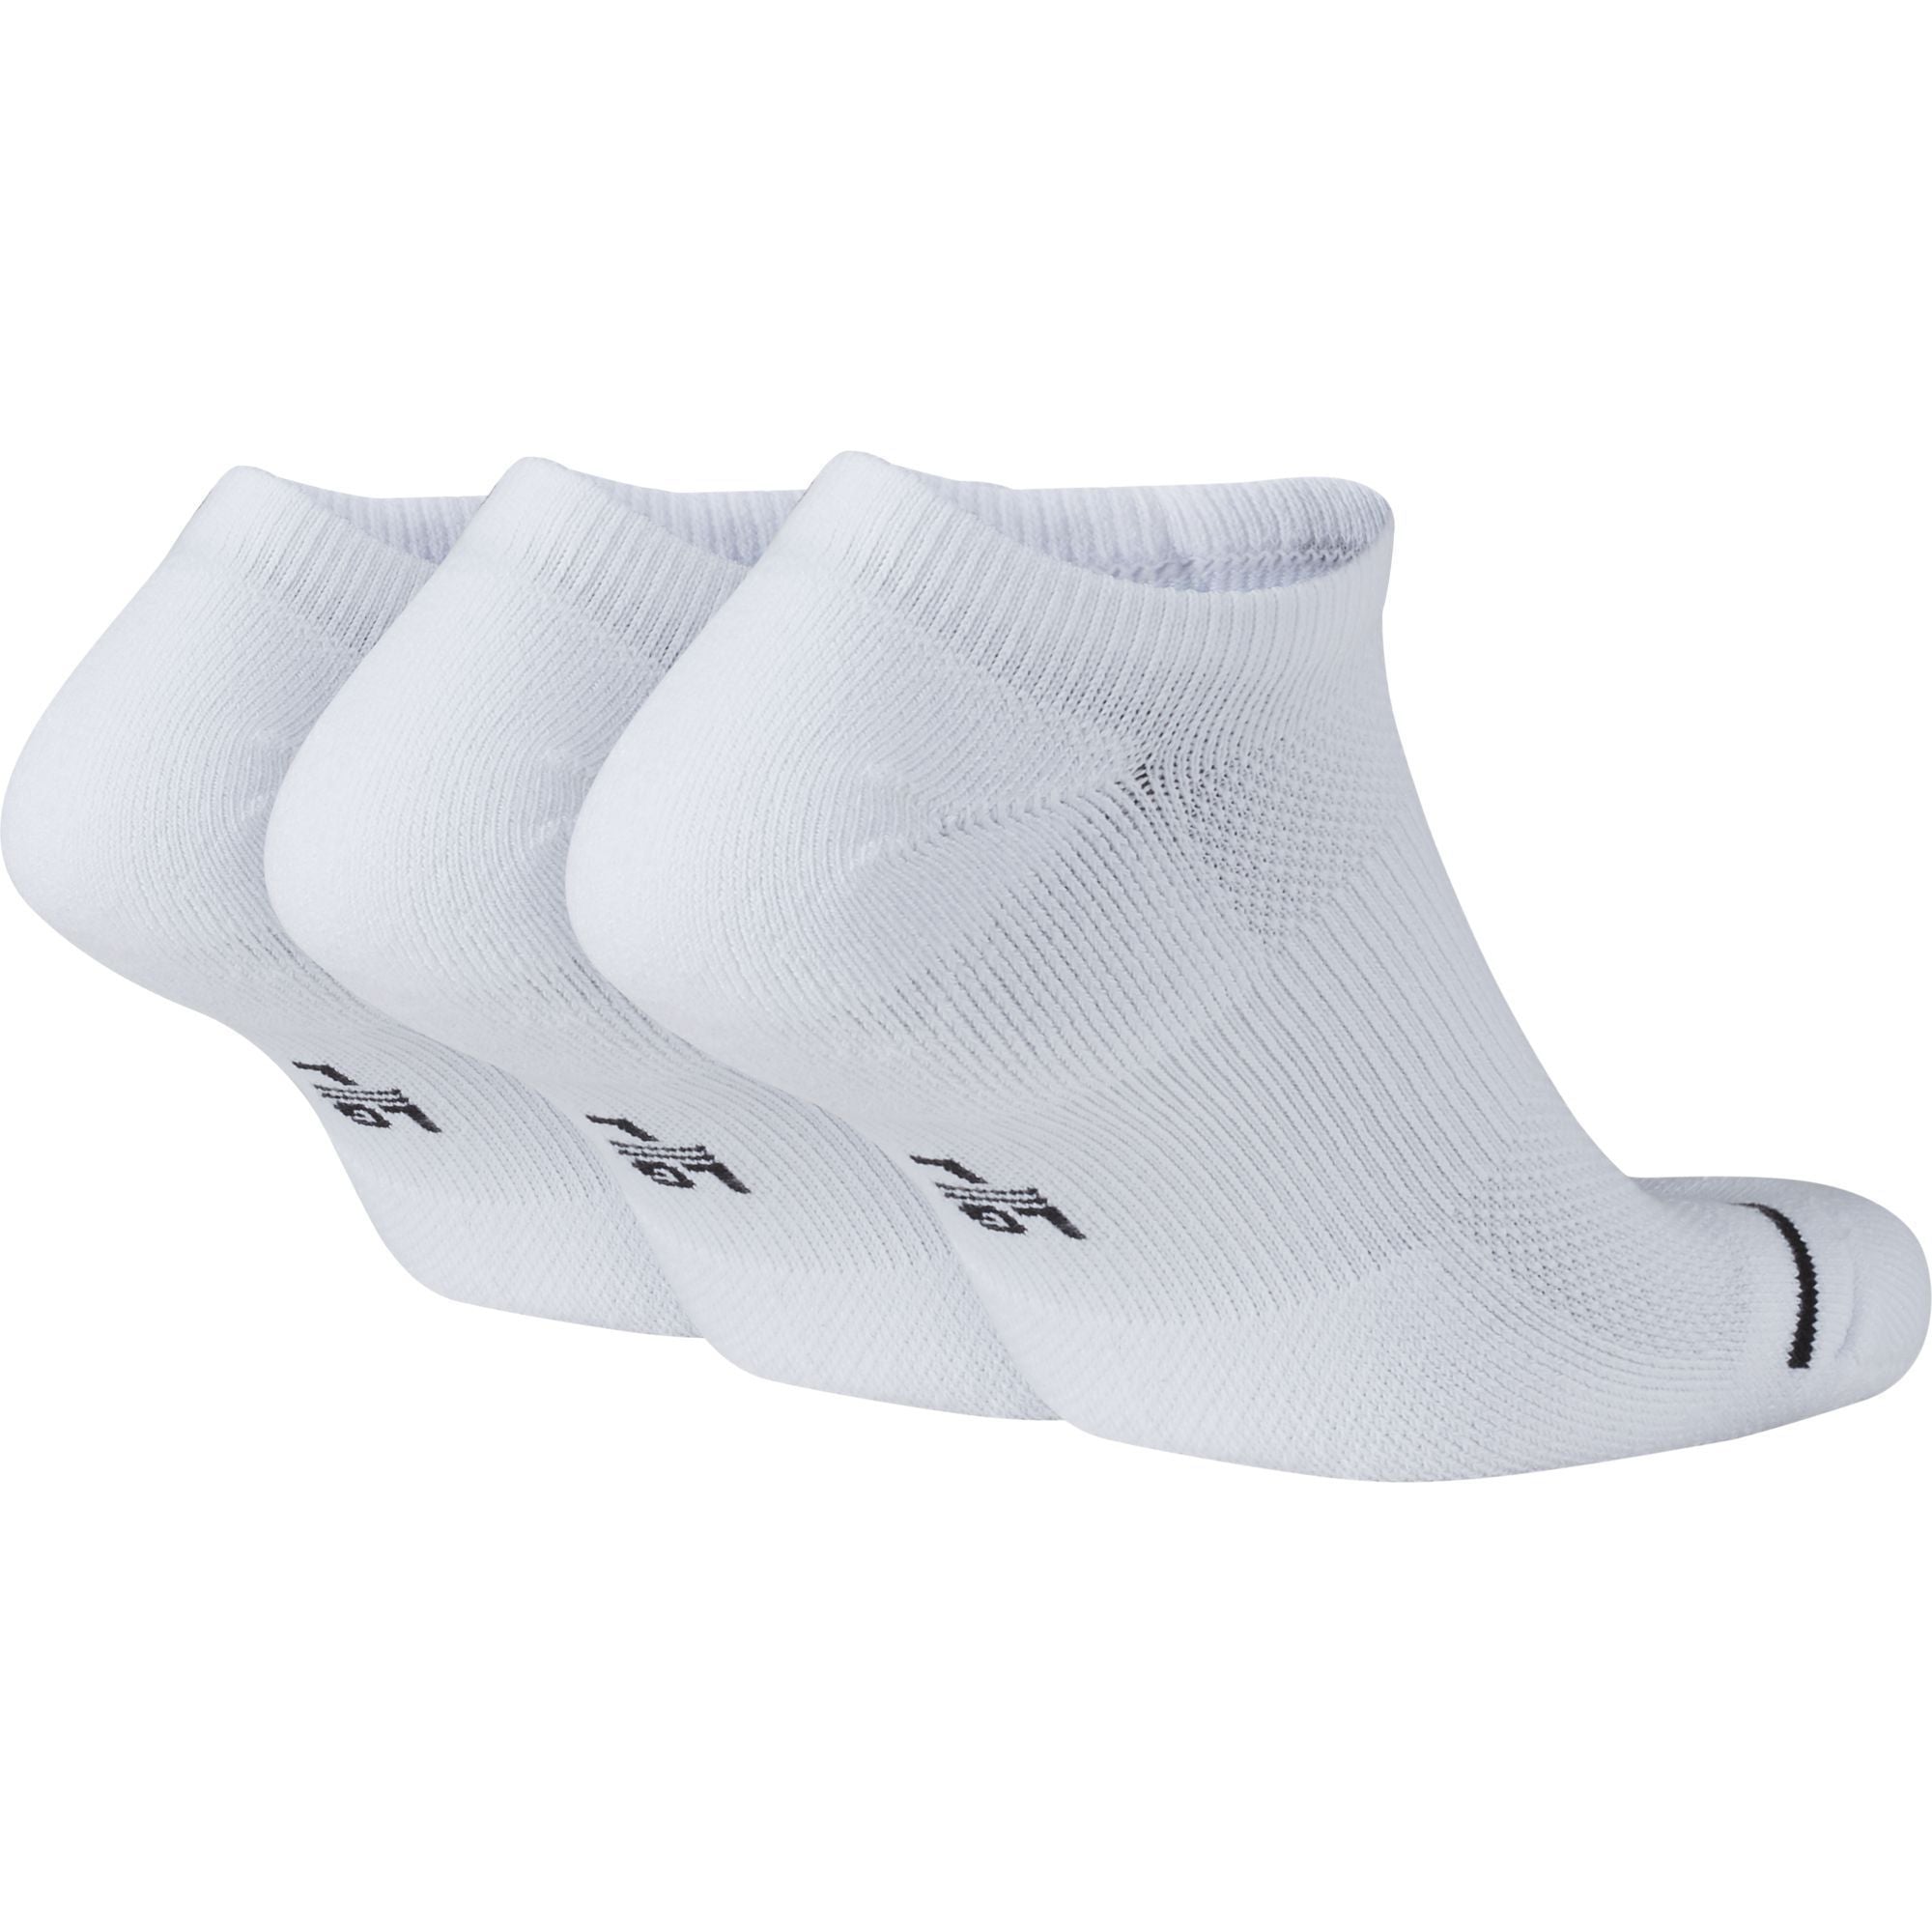 3 Pack Everyday Max No Show Socks